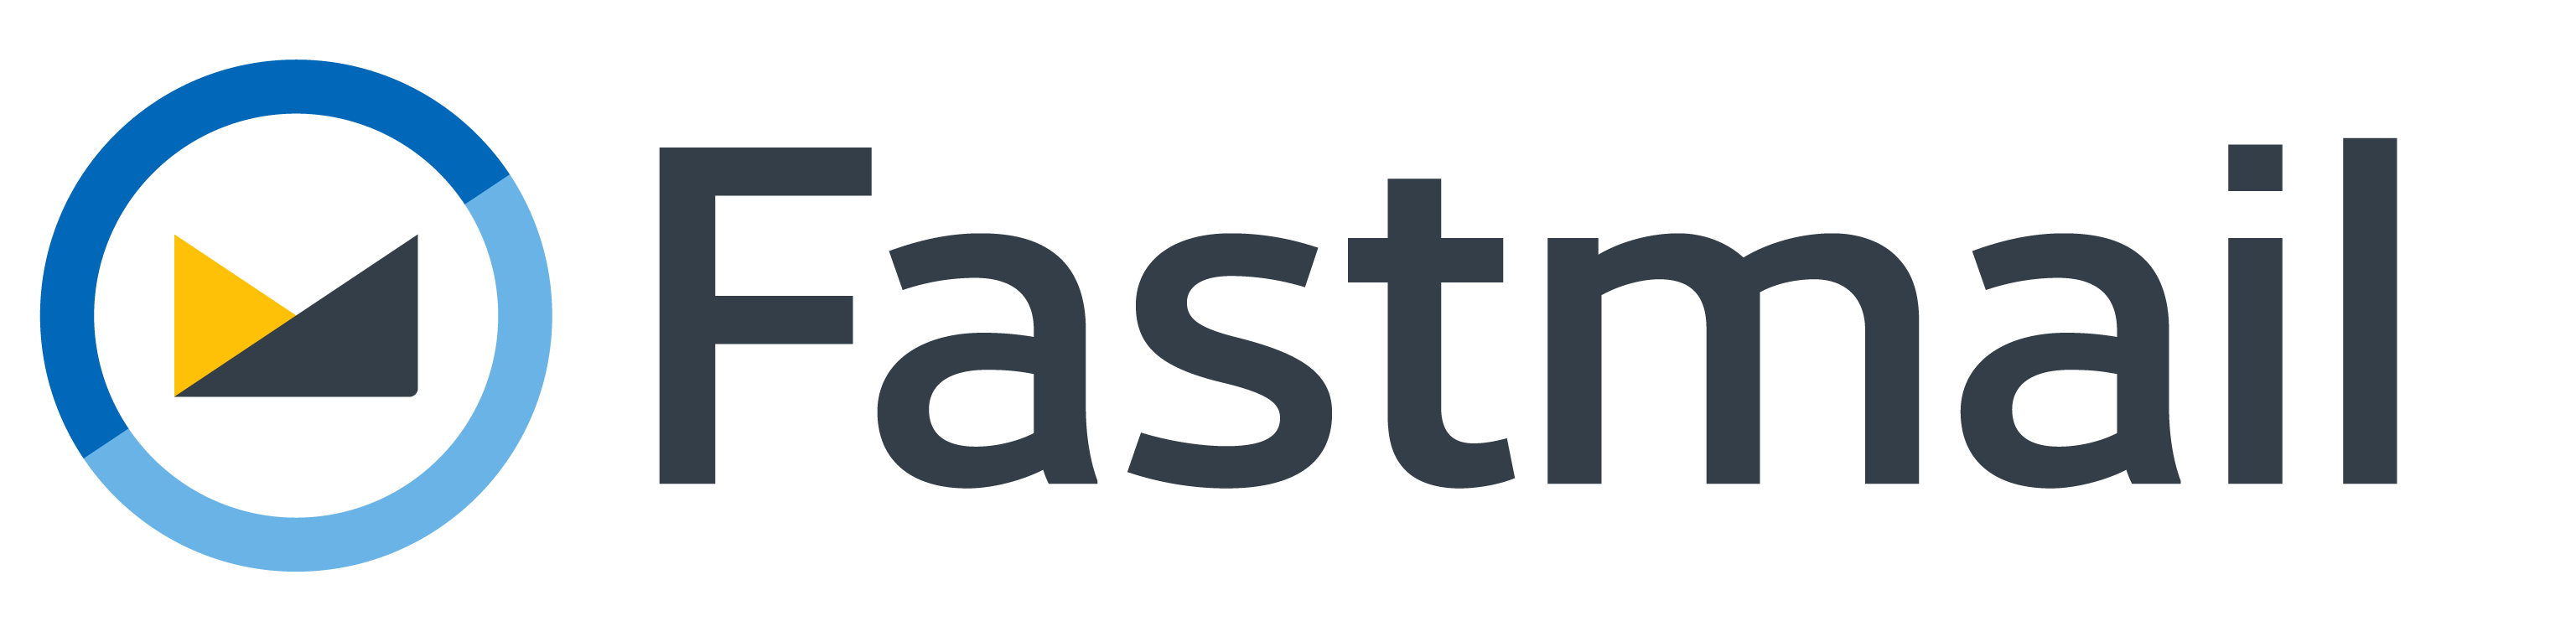 The Fastmail logo